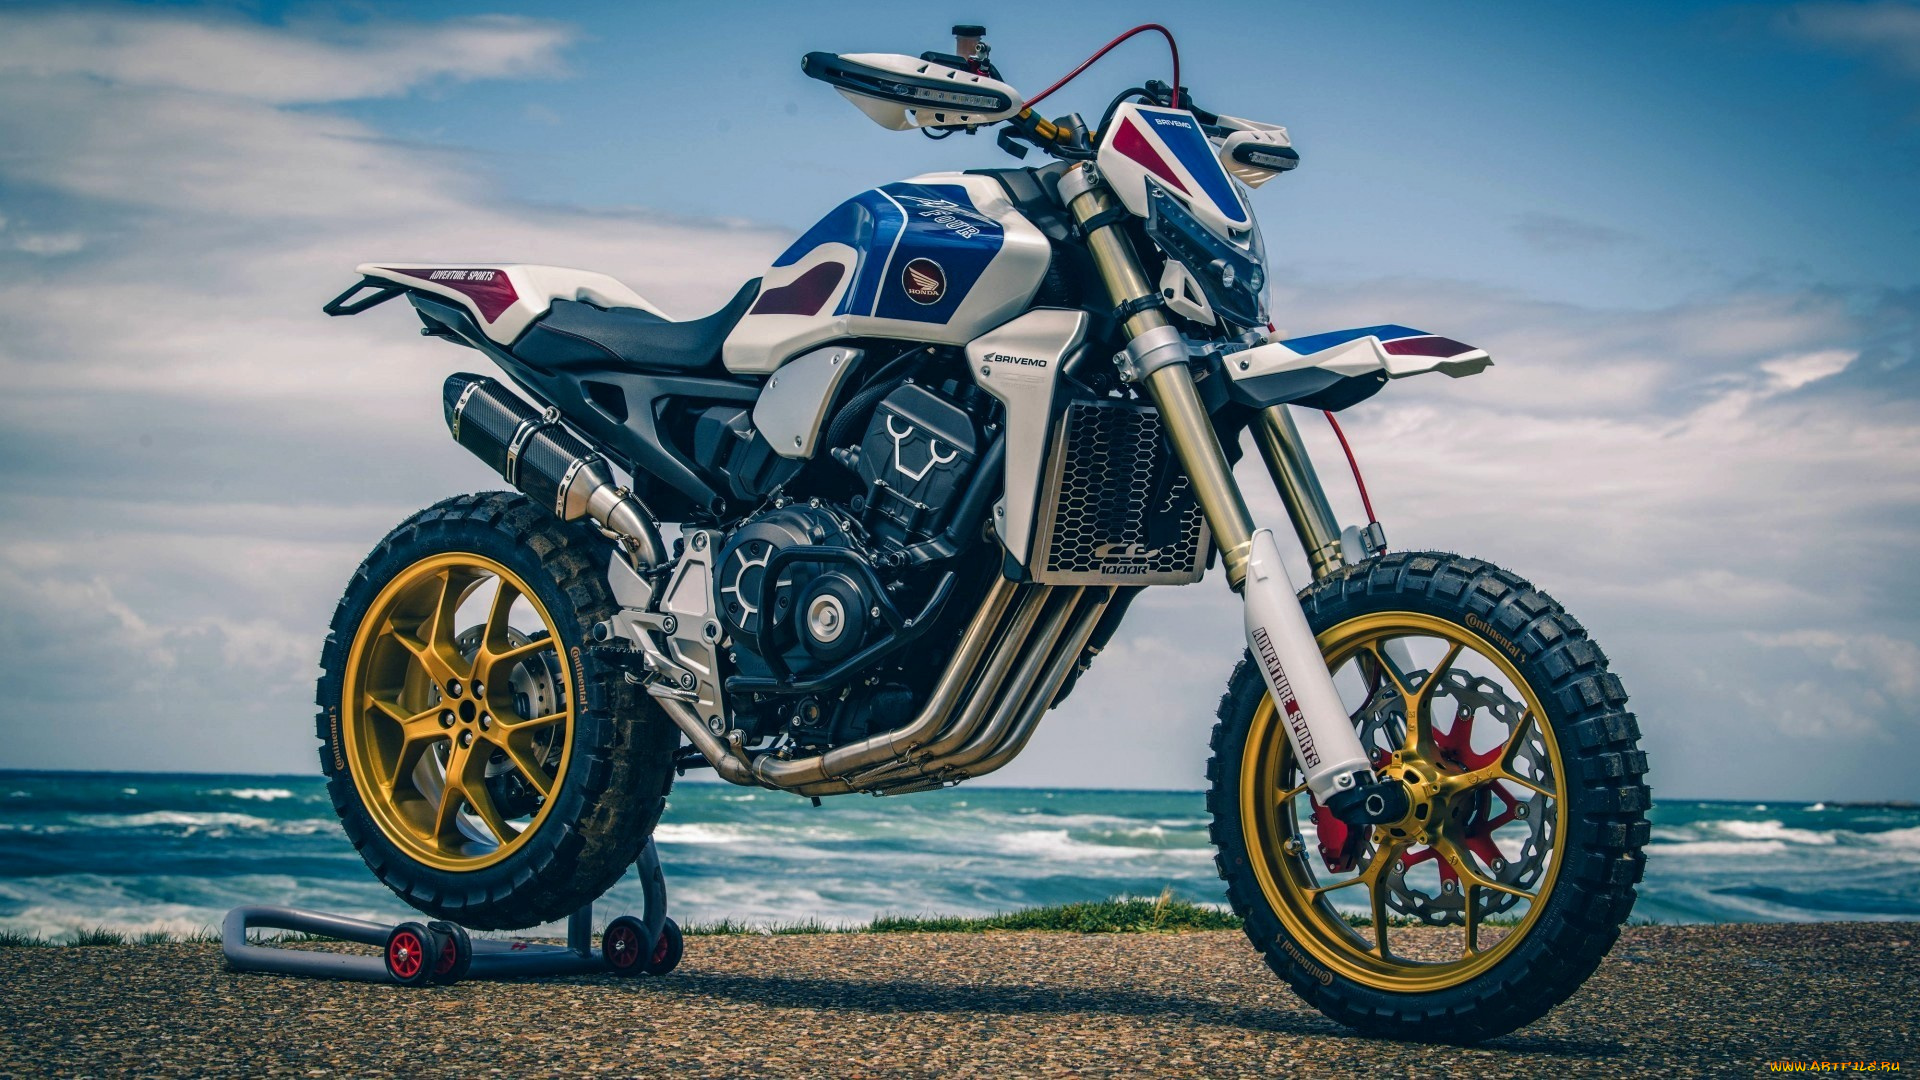 2019, honda, crf1000r, africa, four, by, brivemo, мотоциклы, honda, 2019, crf1000r, africa, four, by, brivemo